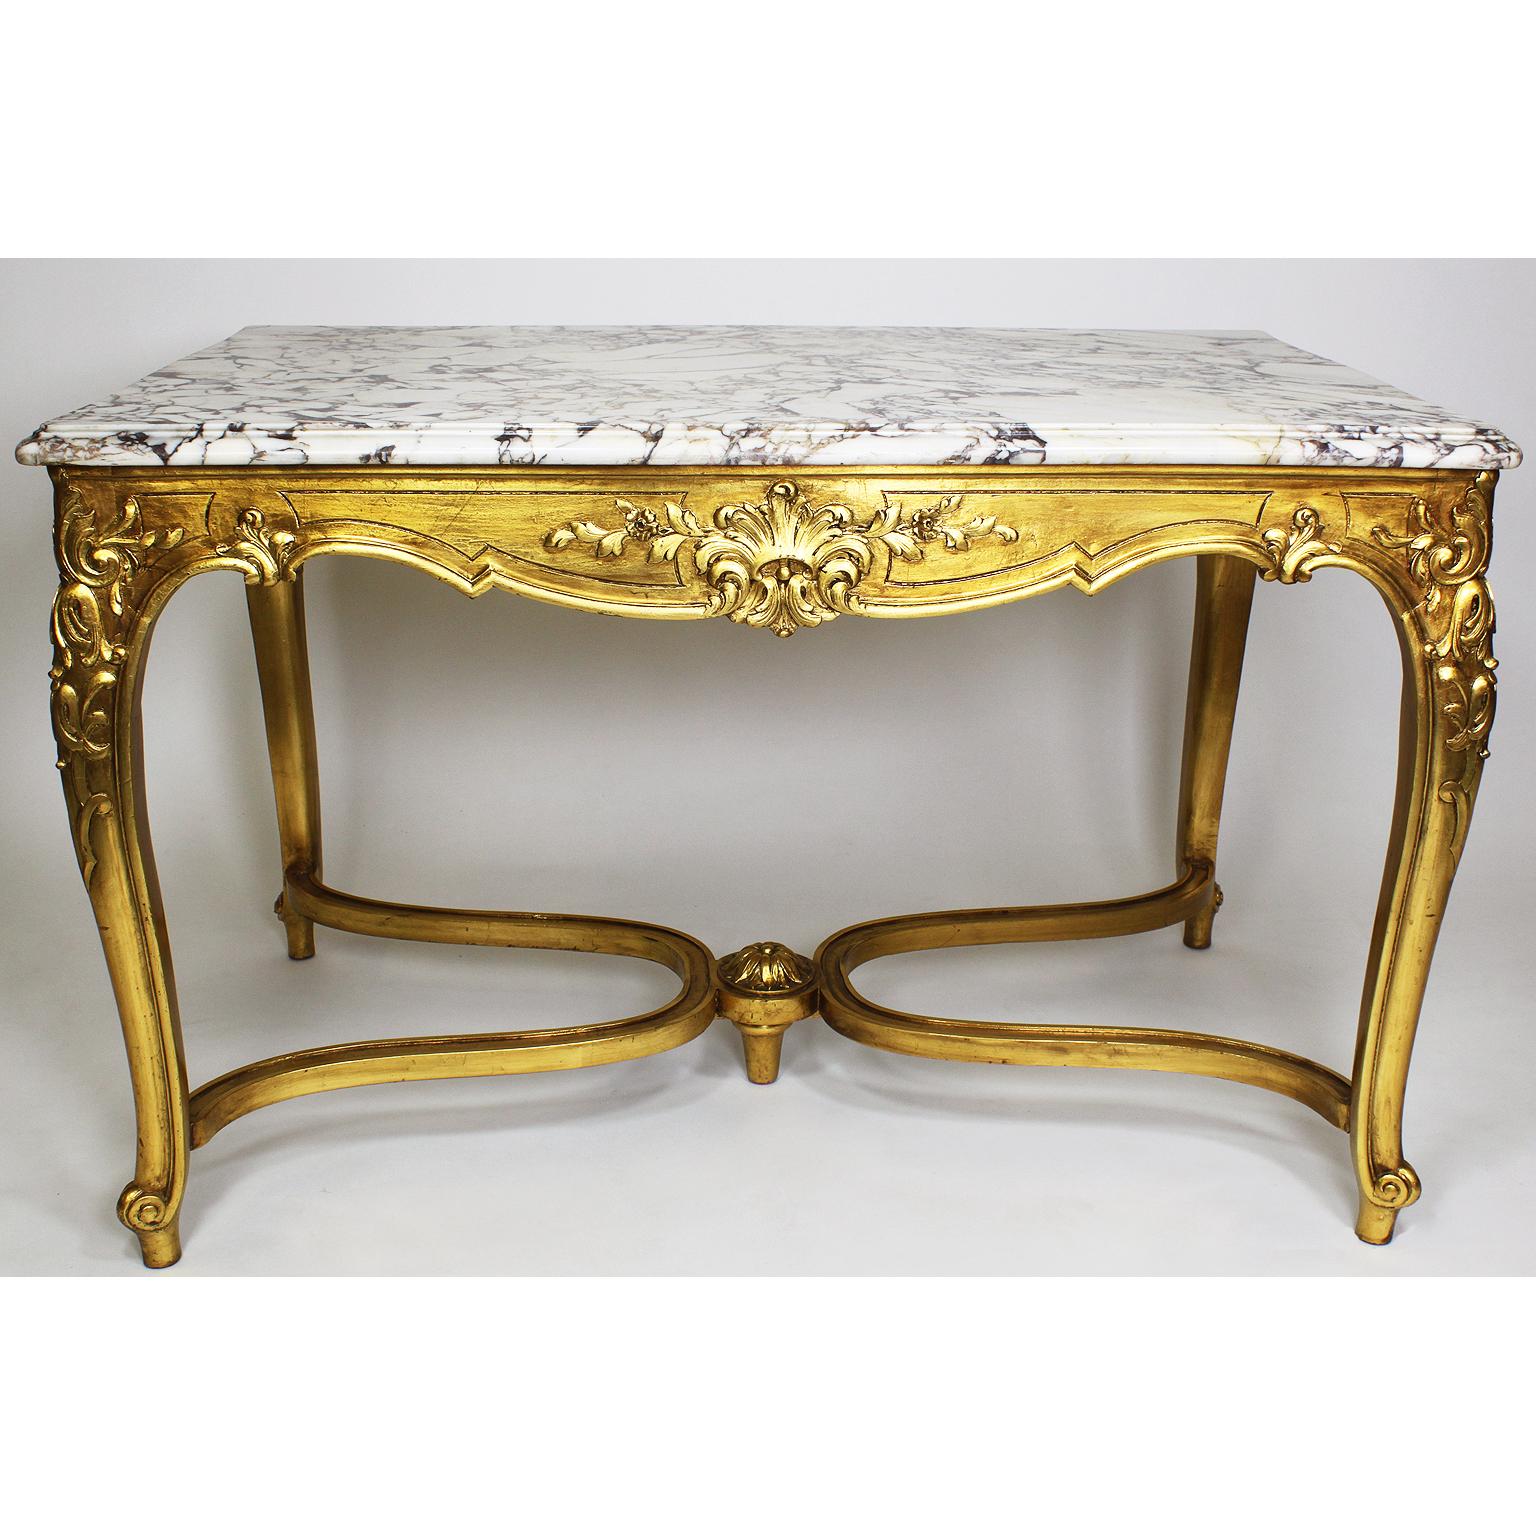 A French Early 20th Century Louis XV Style Gilt Wood Carved Center Table with Veined White Marble Top. Circa: Paris, 1920.

Height: 30 1/2 inches (77.5 cm)
Width: 48 inches (121.9 cm)
Depth: 30 3/8 inches (77.2 cm)

Ref.: A811